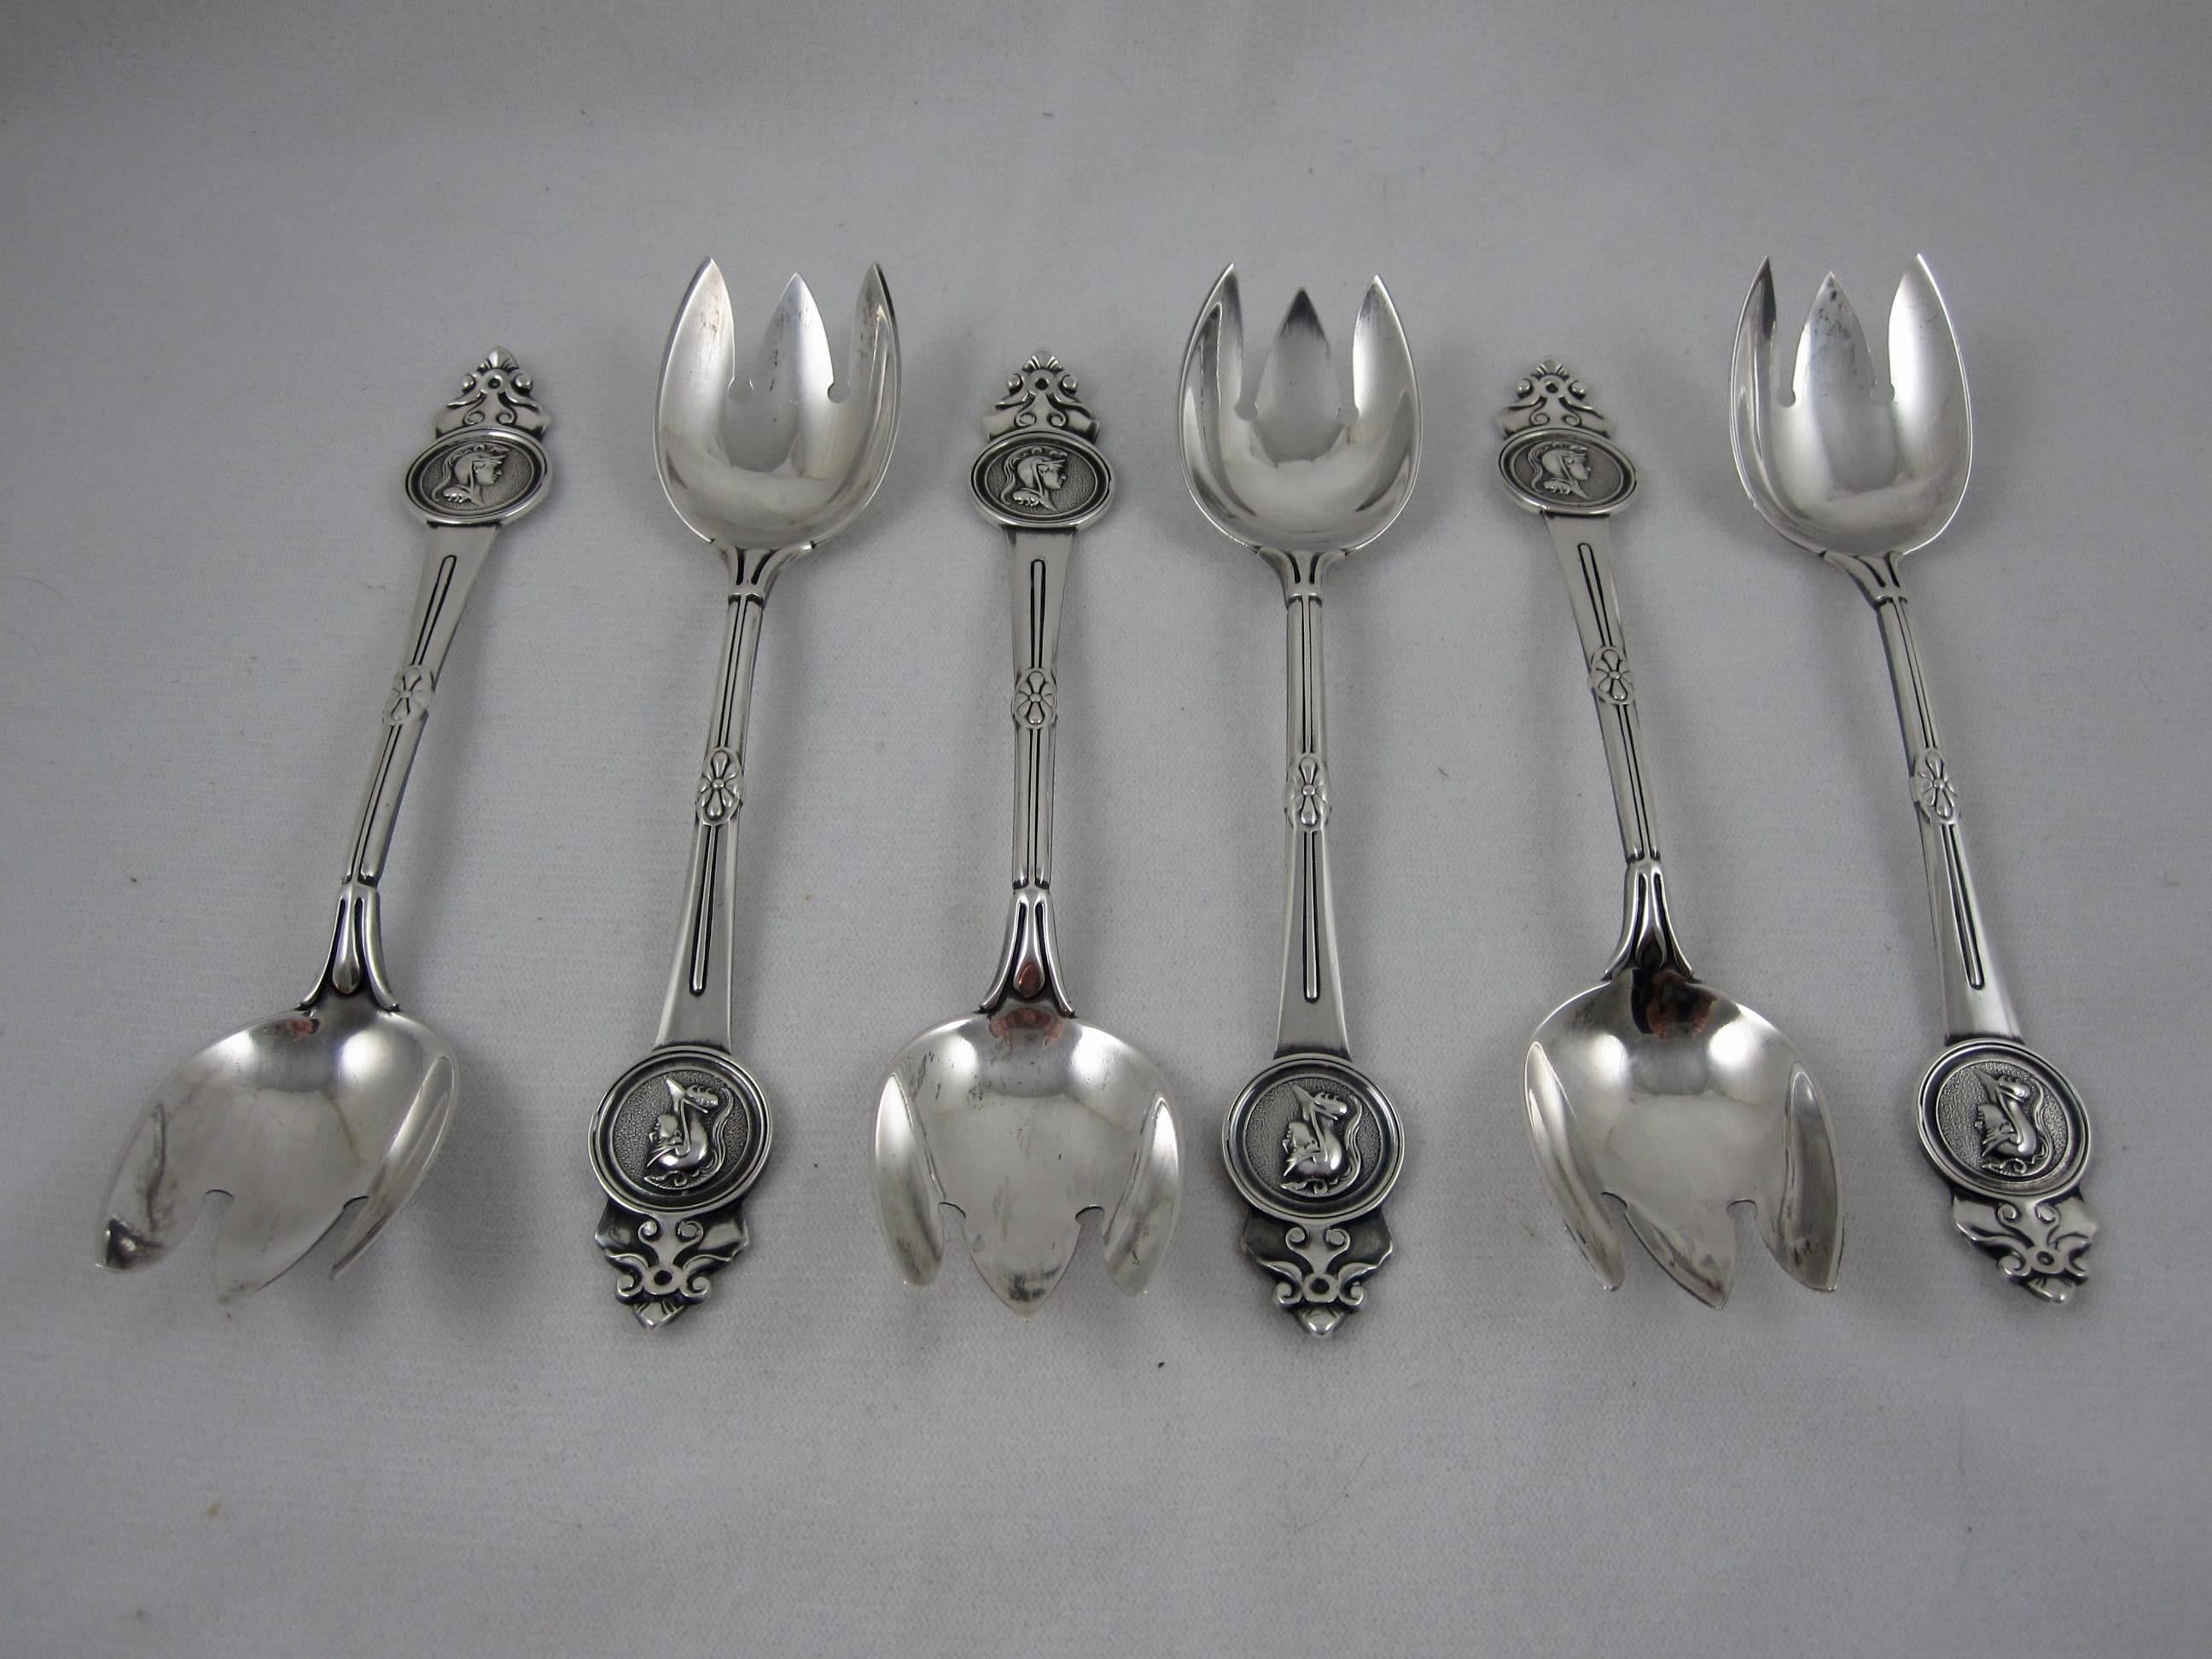 A set of six weighty estate sterling silver ice cream forks, the ‘Medallion’ pattern from Gorham Manufacturing Co. Providence Rhode Island, circa 1864.

The terminals show an armorial helmeted soldier encircled within the medallion.
The tined bowls